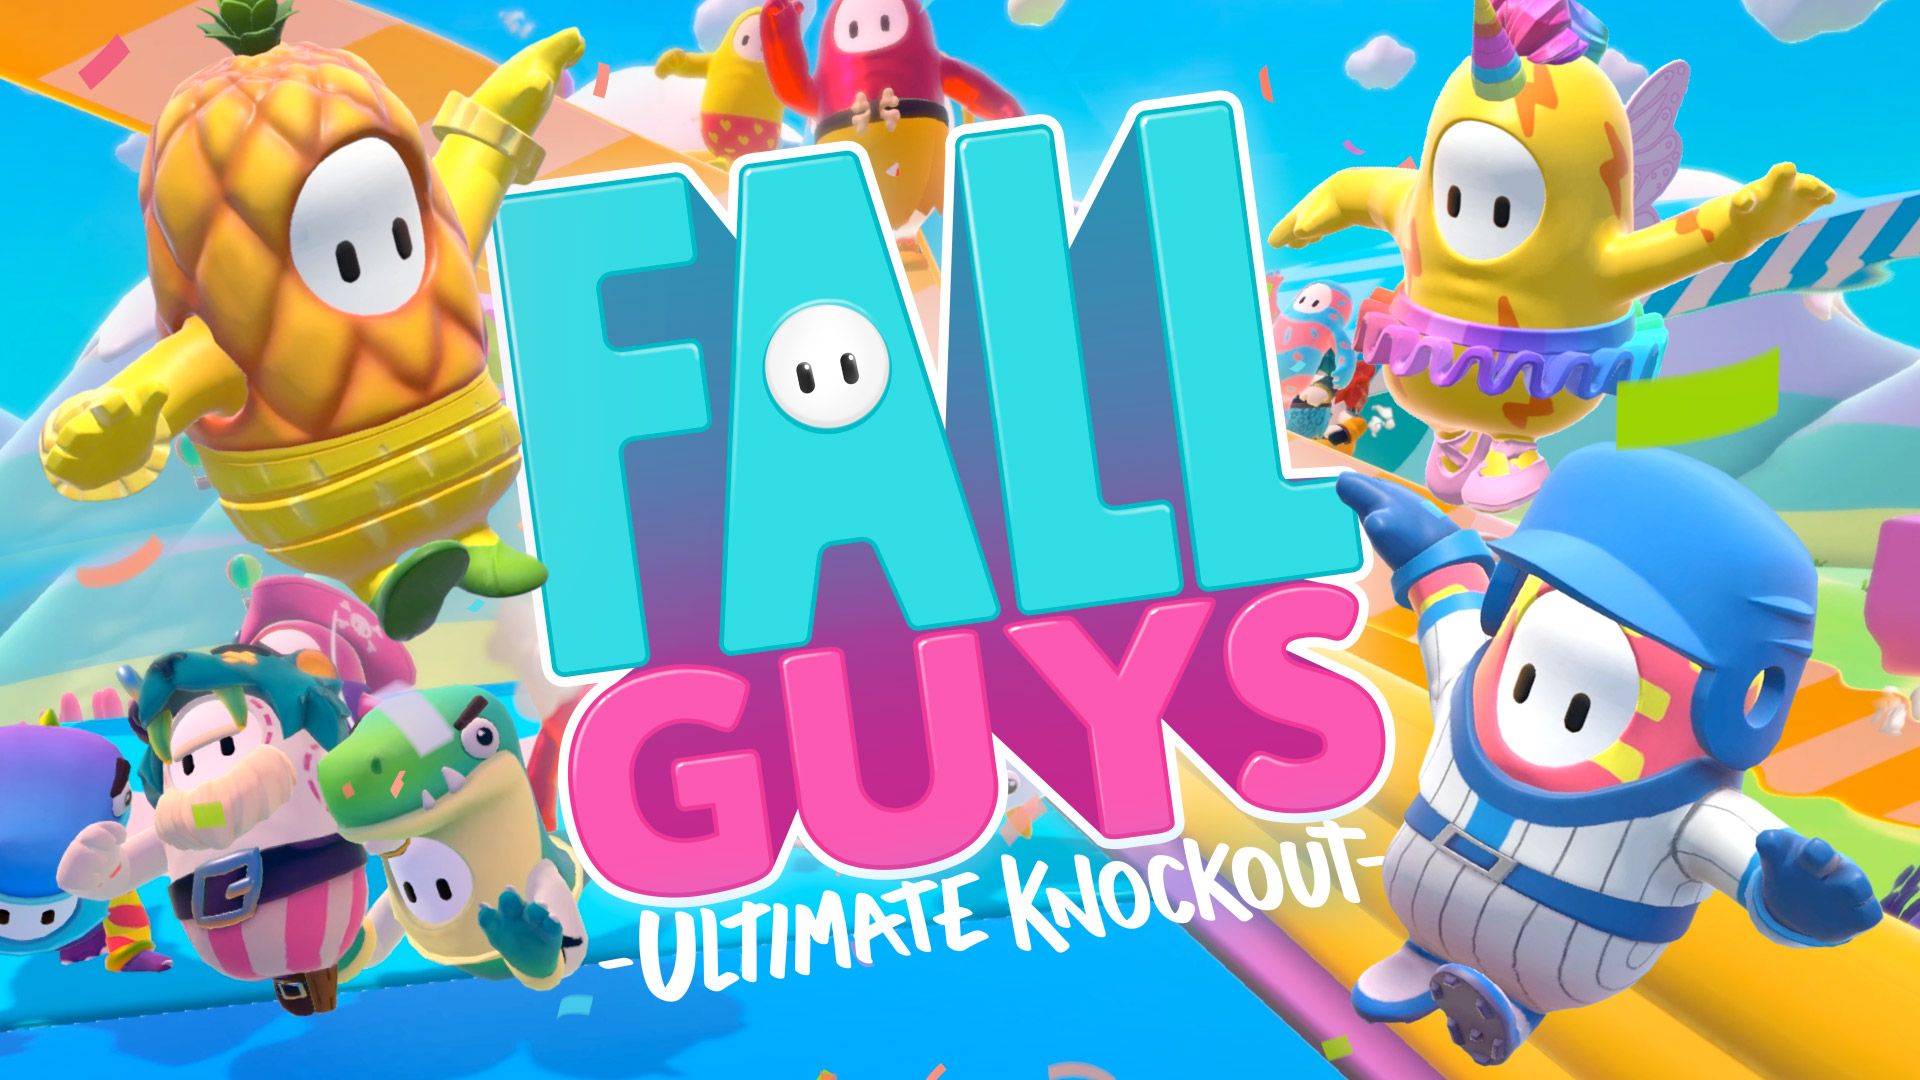 Fall Guys Minigames Guide of All Current Games